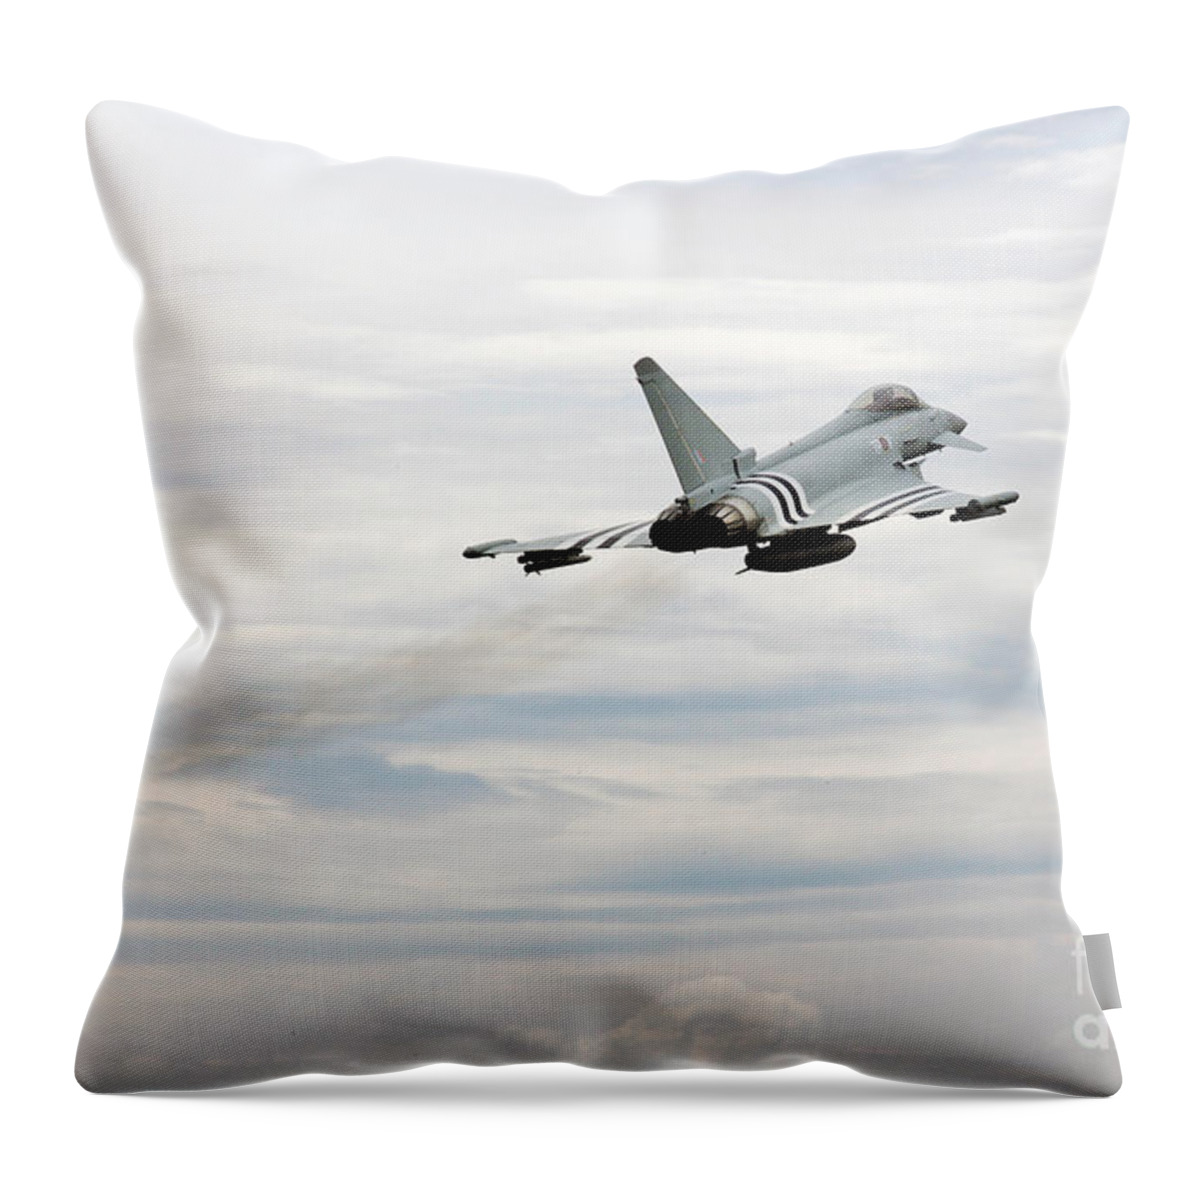 Raf Typhoon Throw Pillow featuring the photograph Invasion Typhoon by Airpower Art